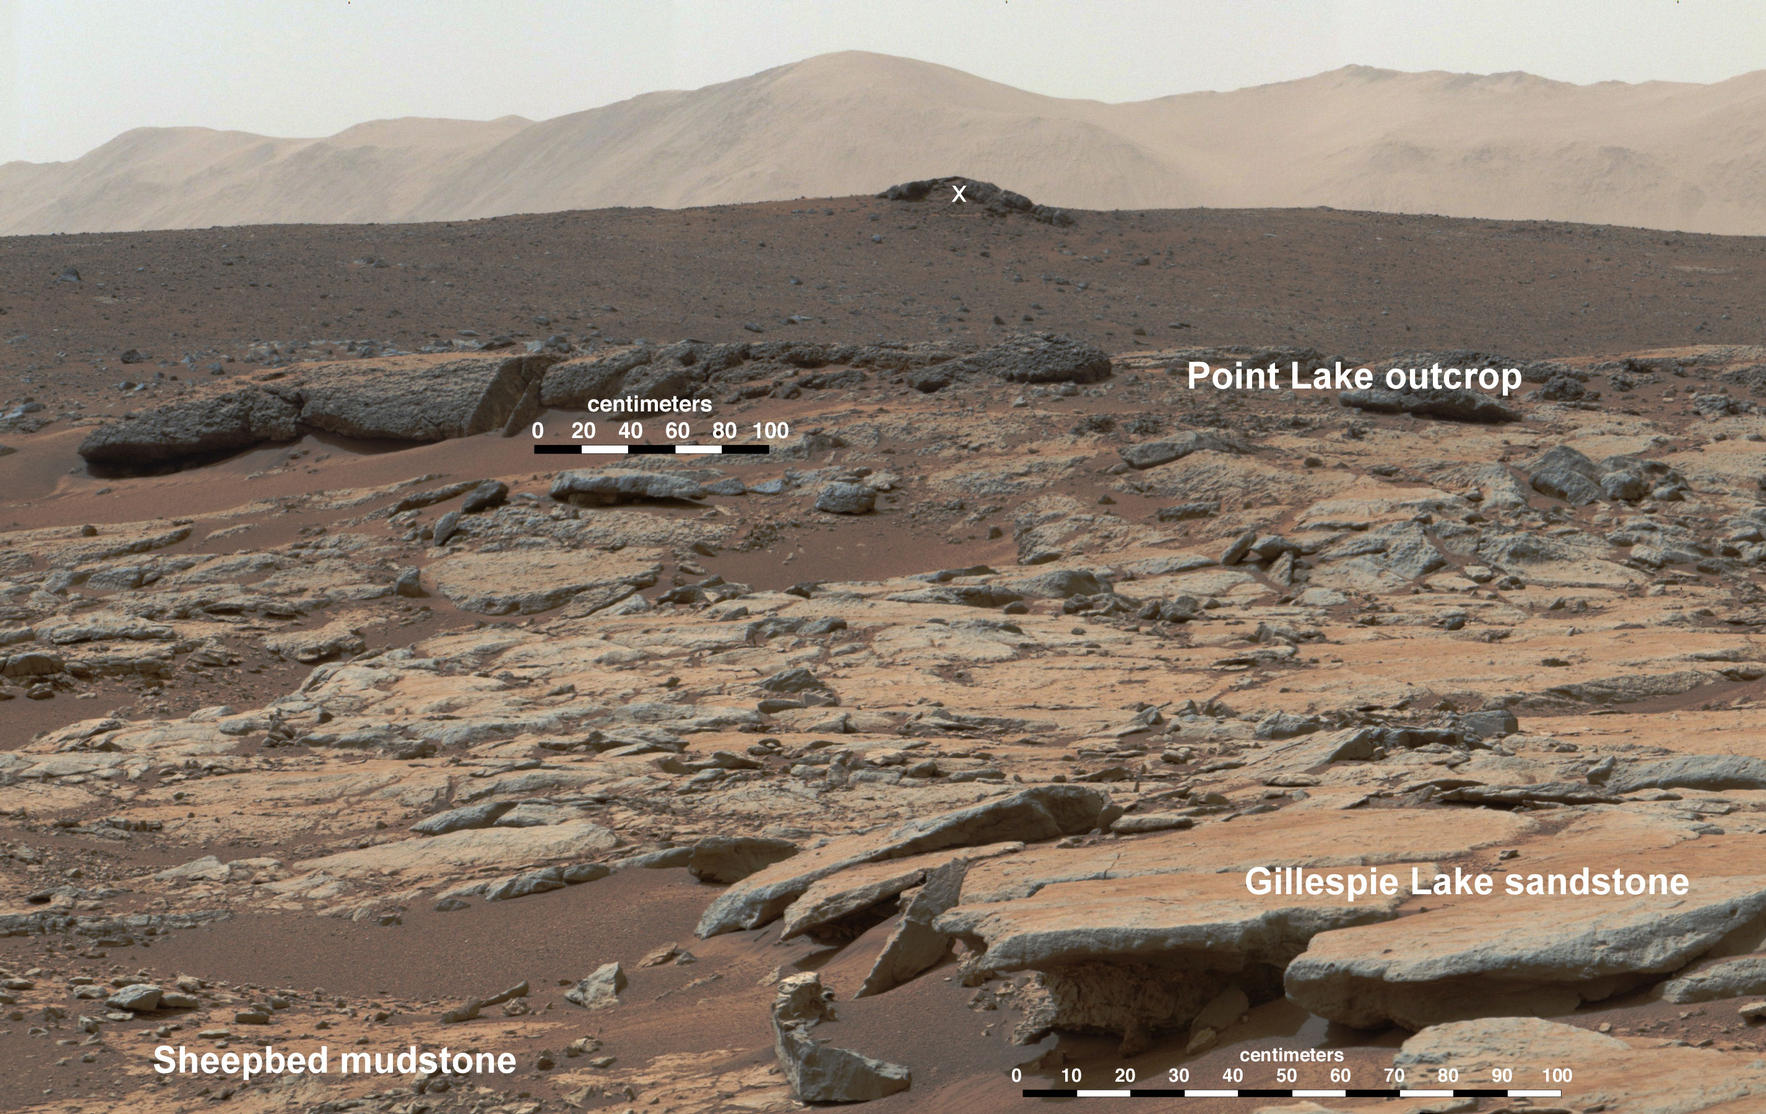 Erosion by Scarp Retreat in Gale Crater